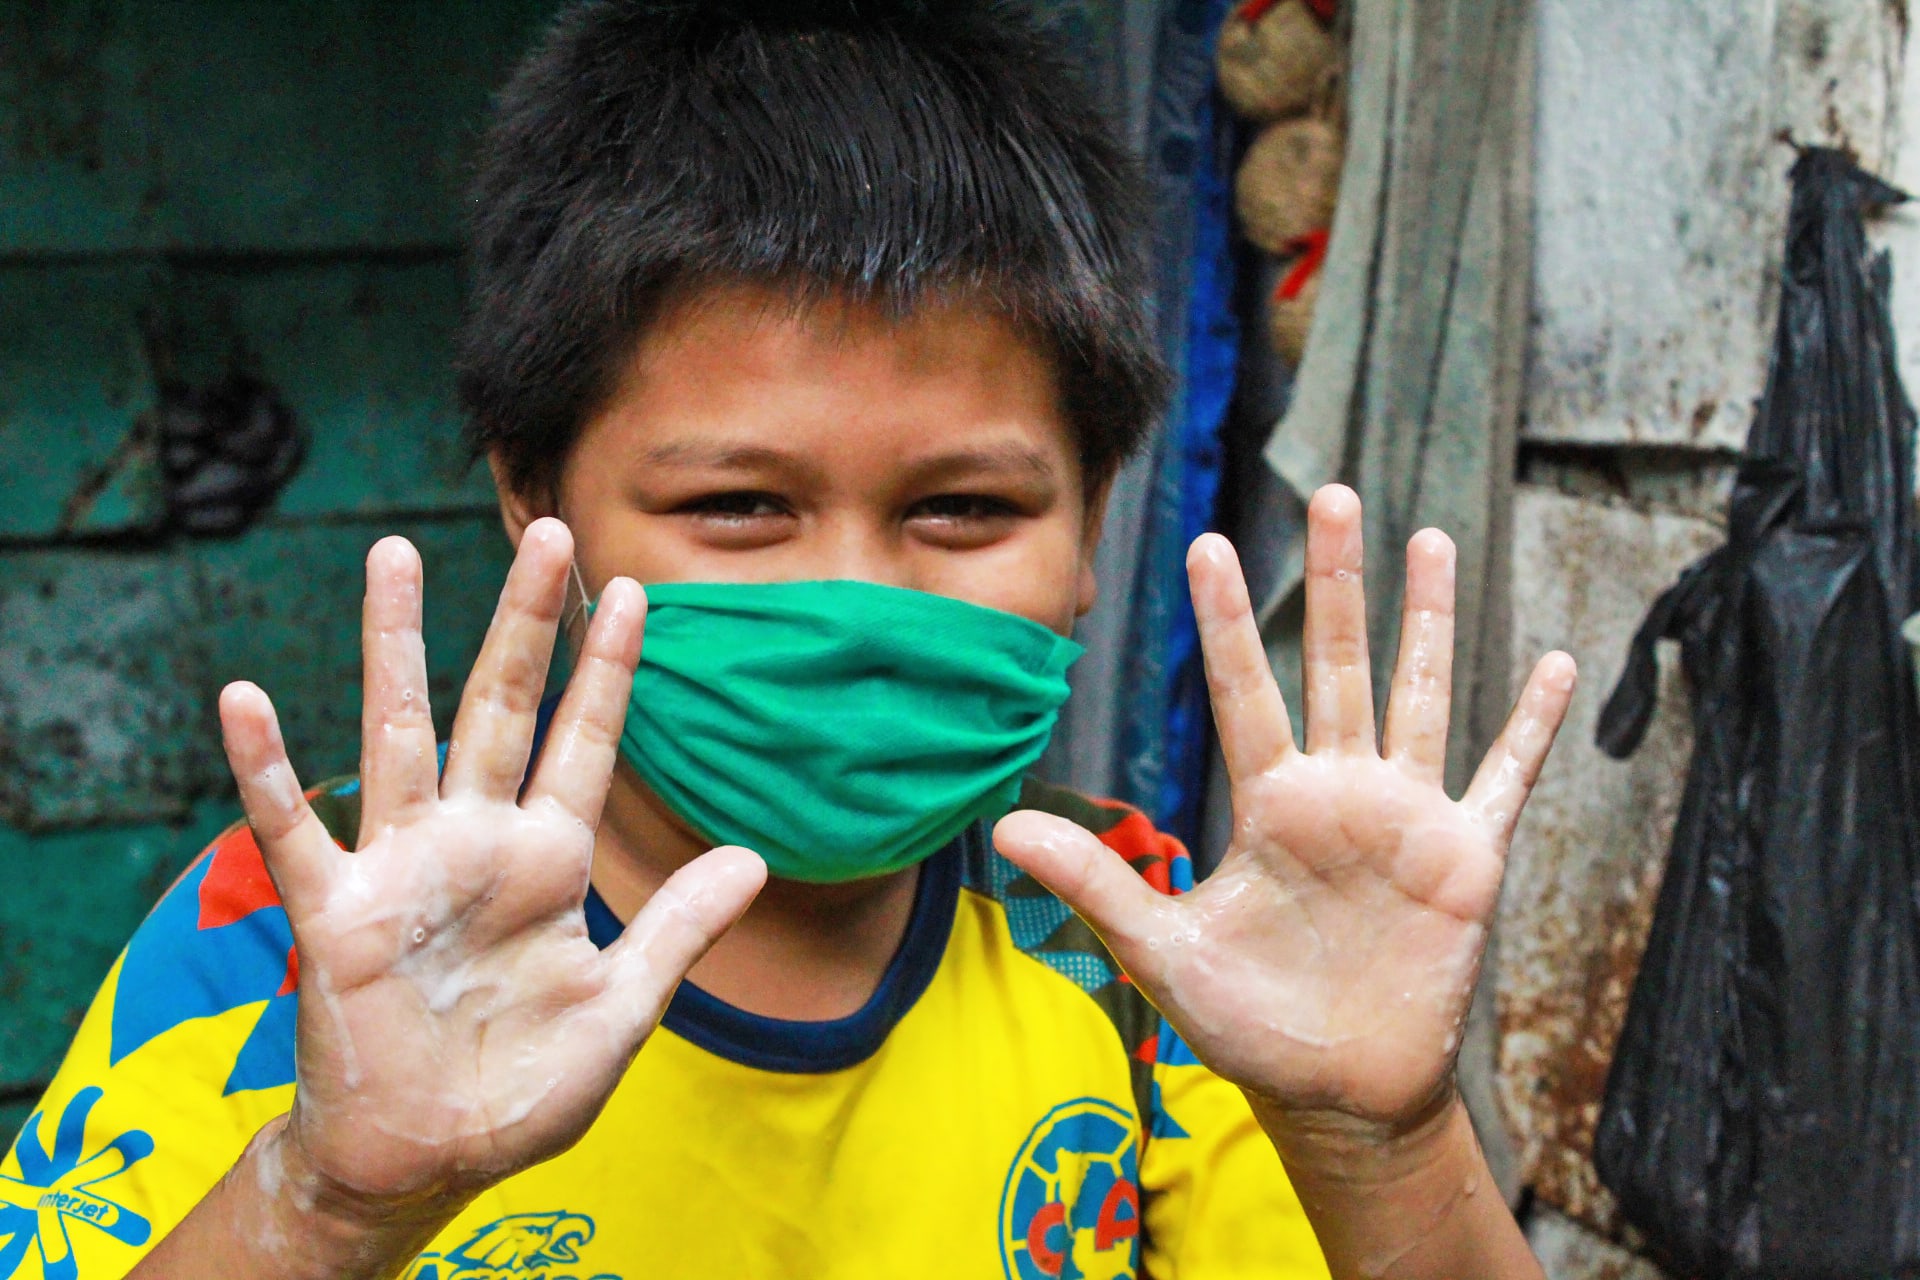 Ten-year-old Carmelo wears a green mask and yellow shirt and holds up both his hands to show they are freshly washed.